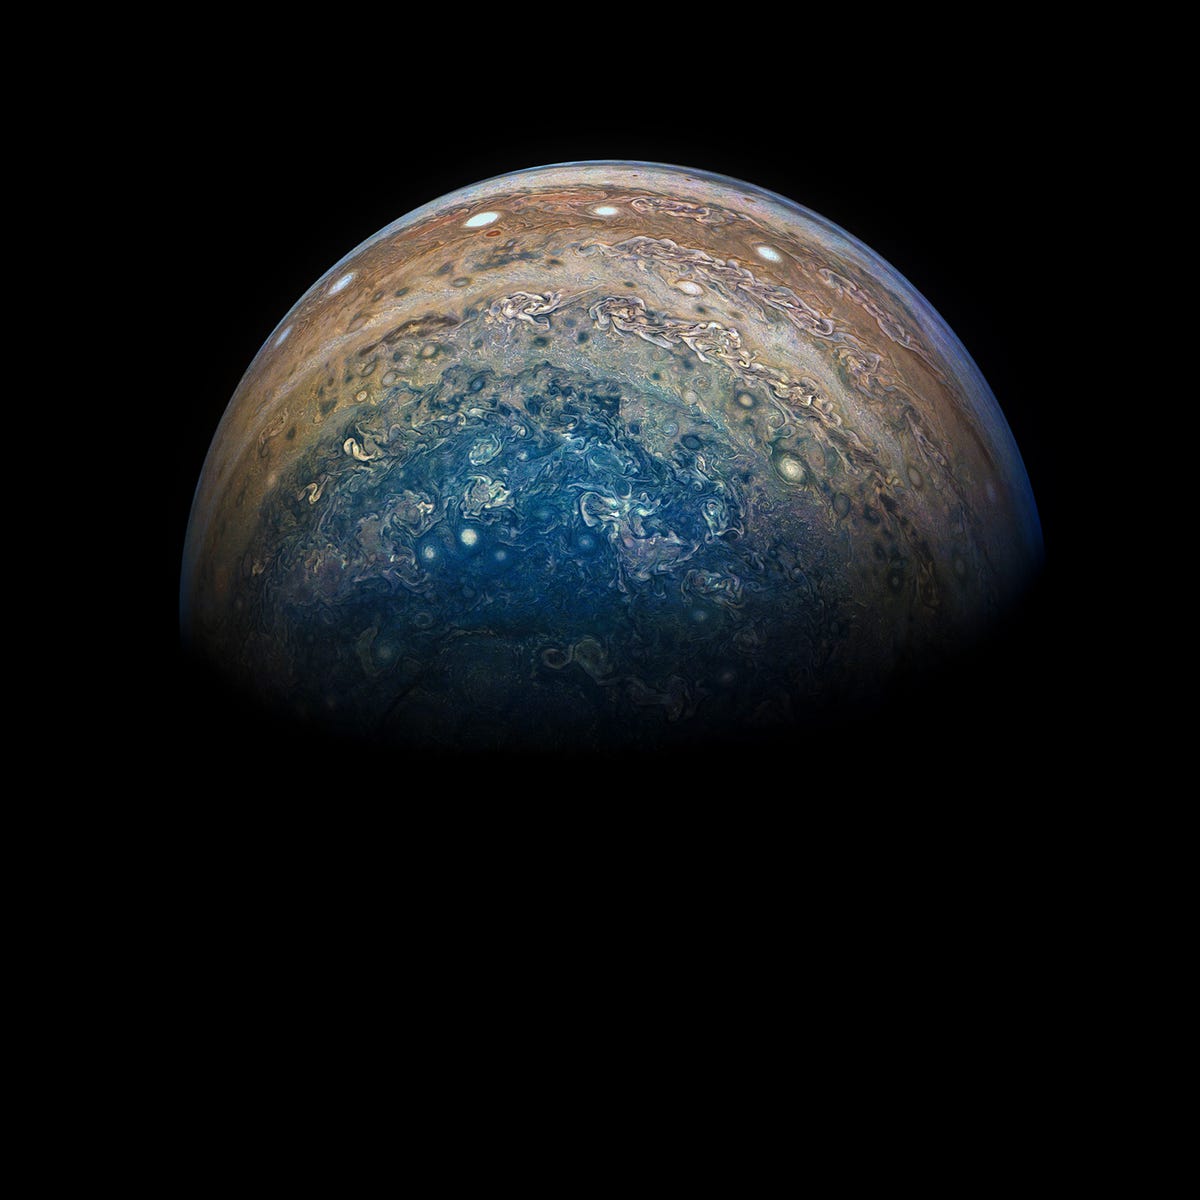 nasa-launched-juno-in-2011-and-it-took-nearly-five-years-for-the-probe-to-reach-jupiter.jpg